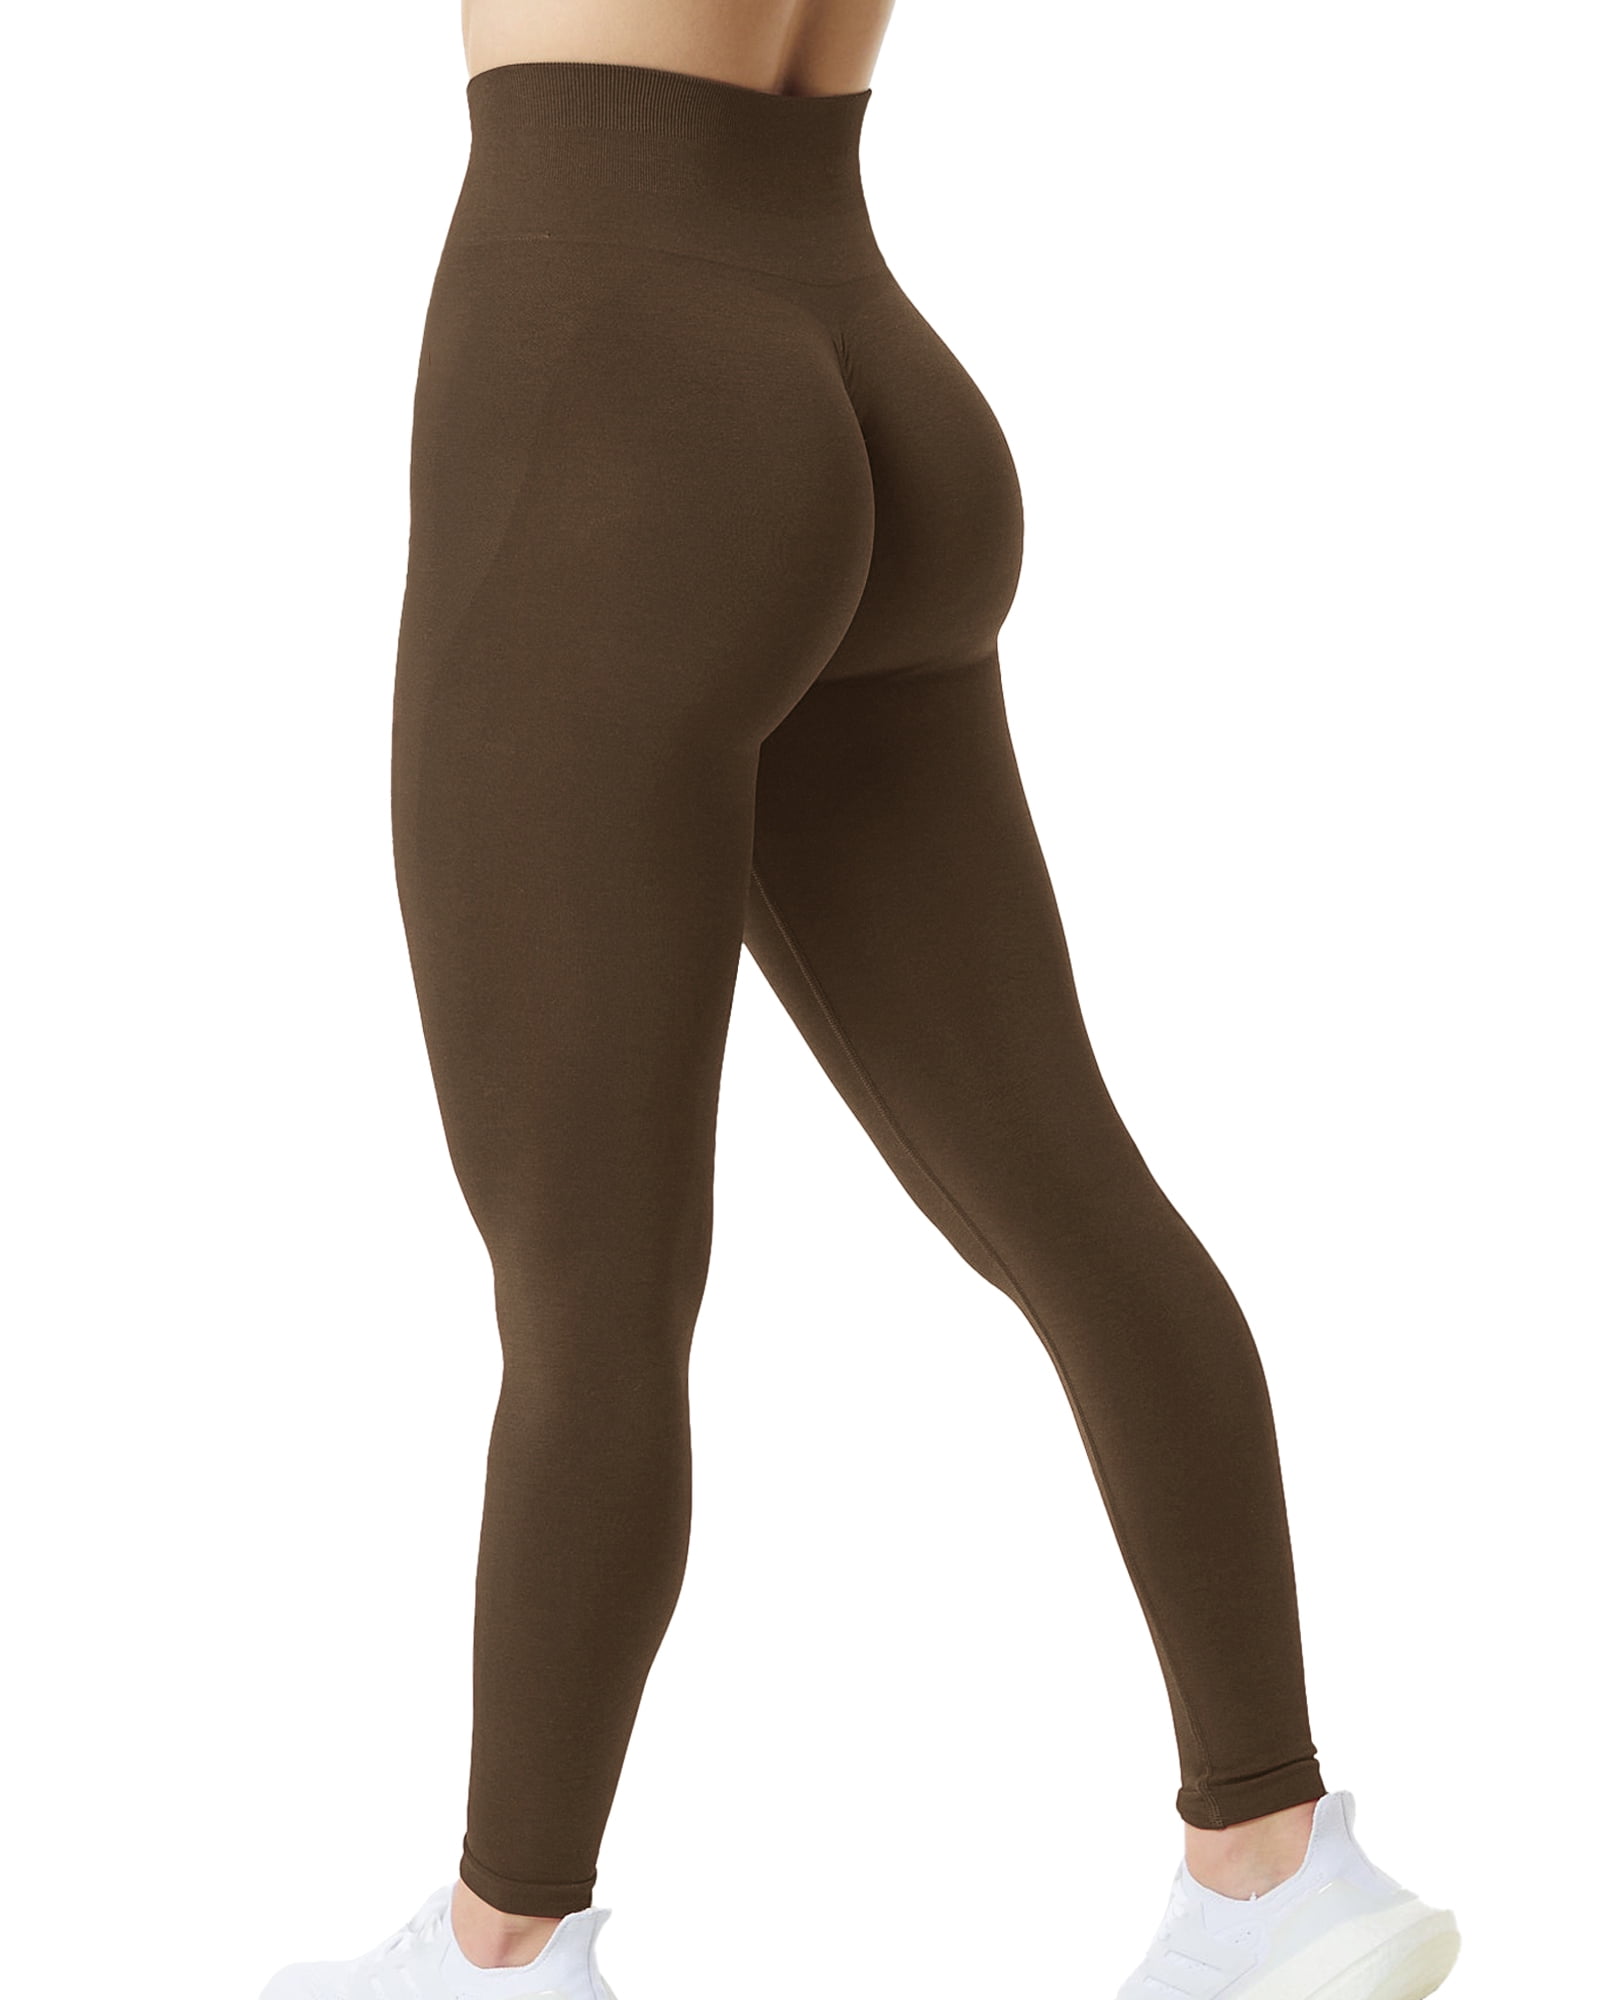 NEW Pchee Pro Brown Scrunch Butt Leggings are now available online! 🤎